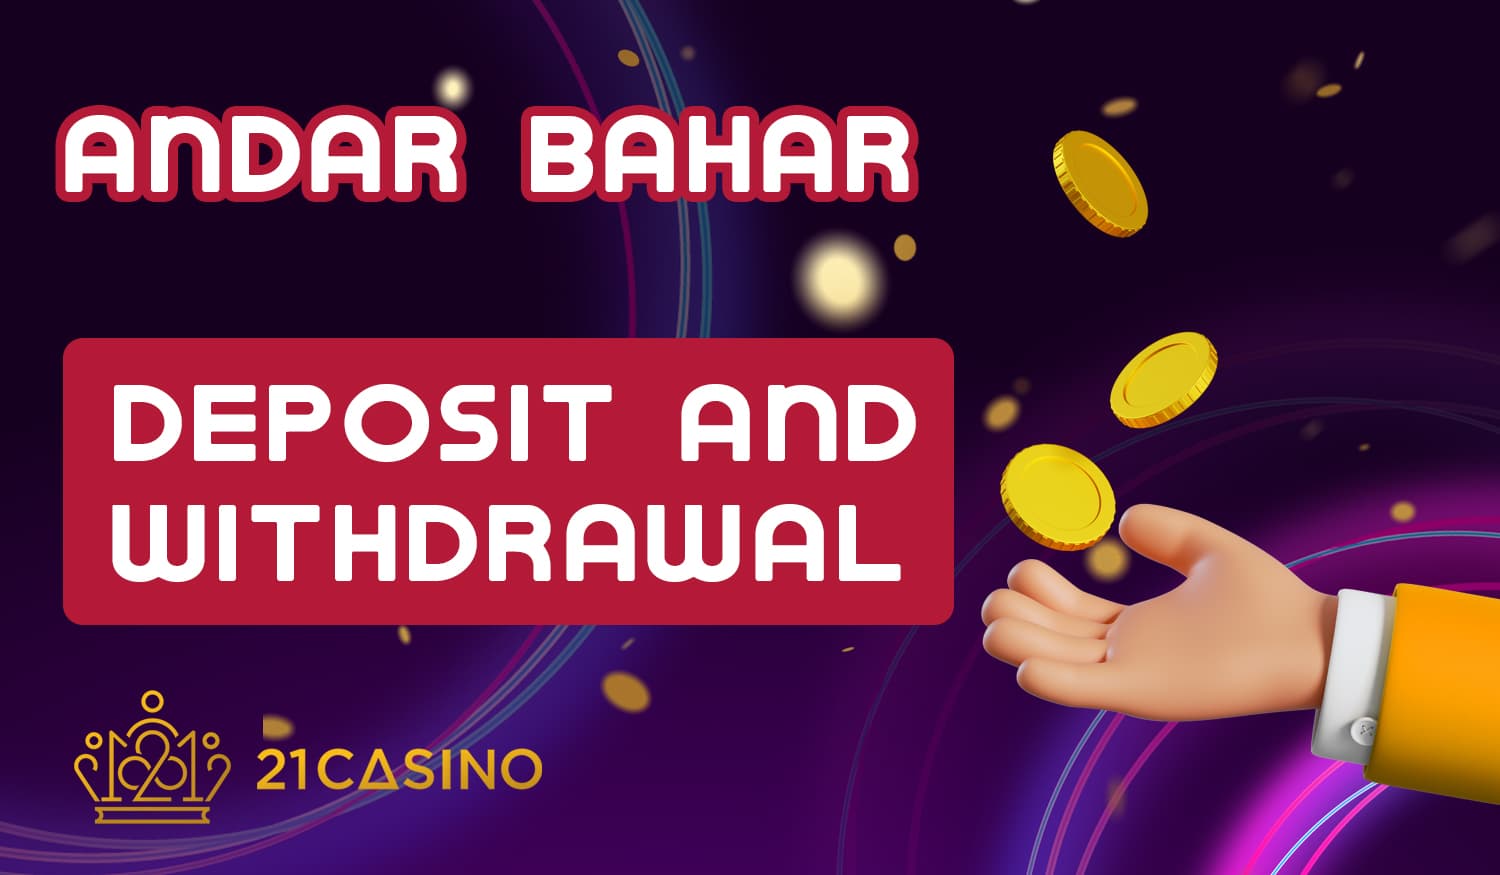 What payment methods are available at 21 Casino for making deposits and withdrawals